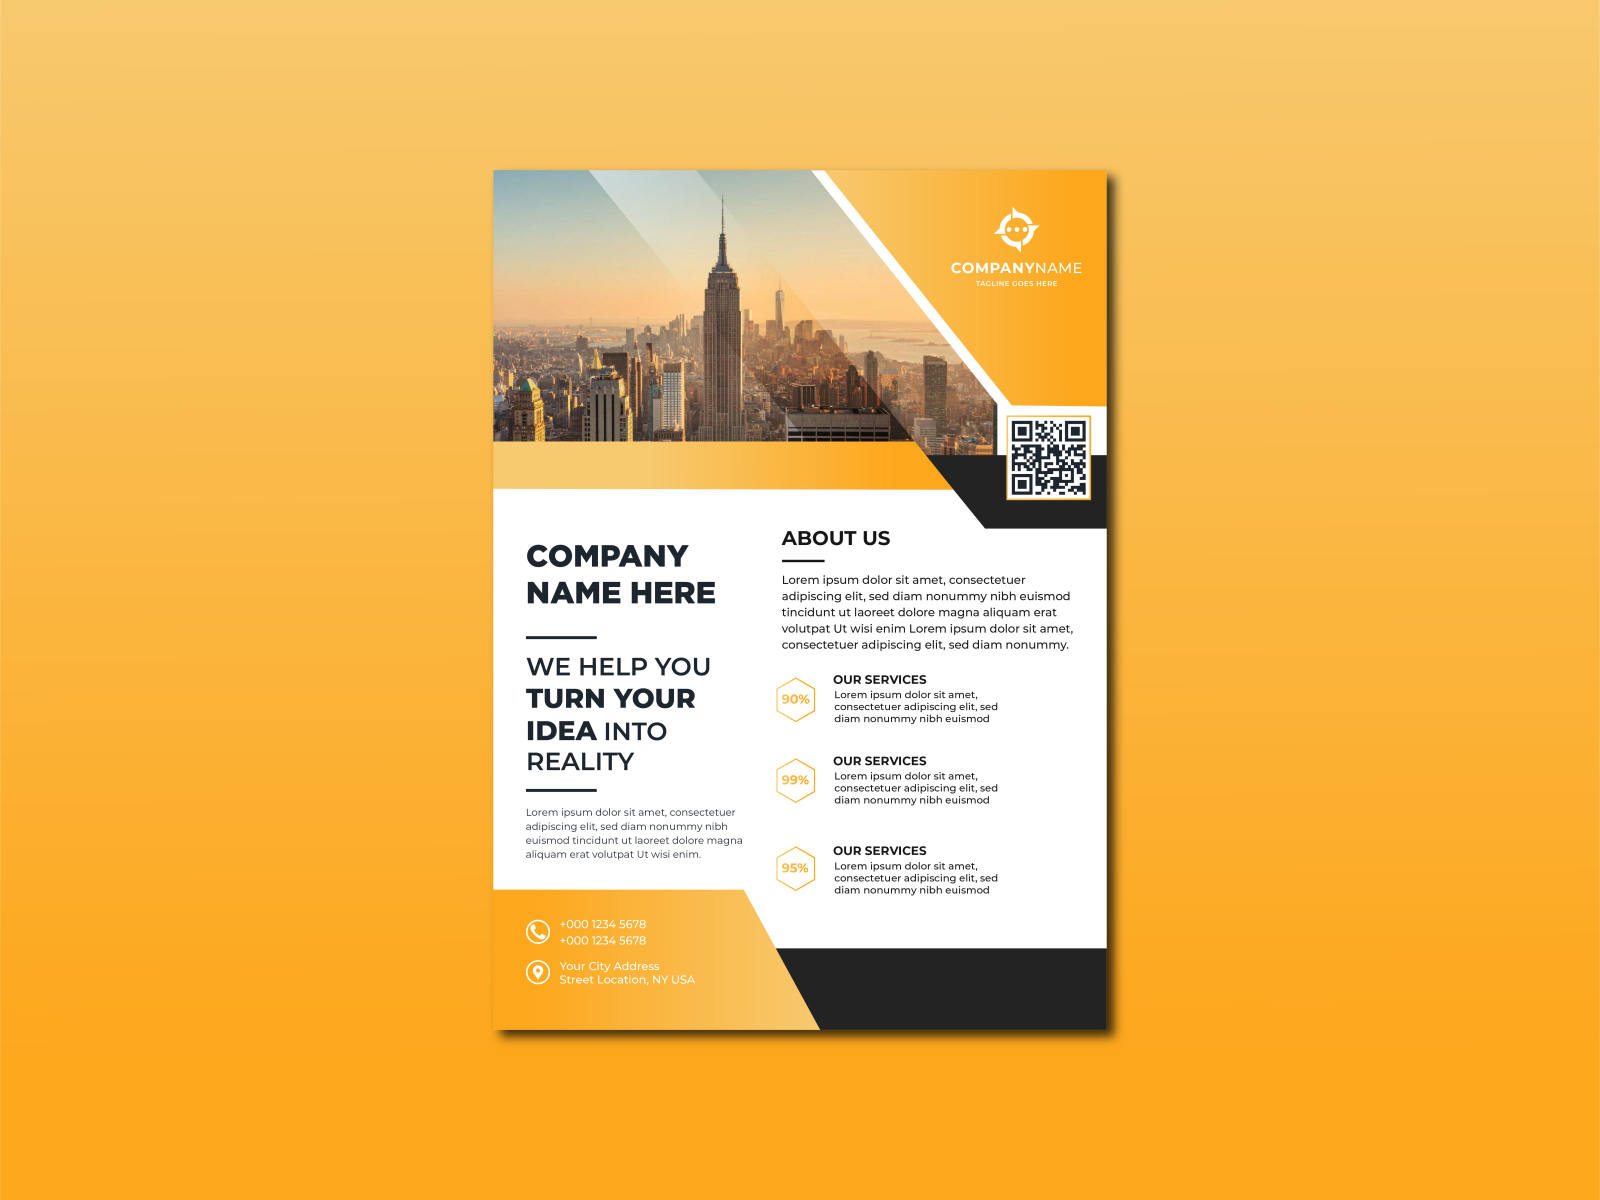 Business Flyer Design by Piximoon Design on Dribbble